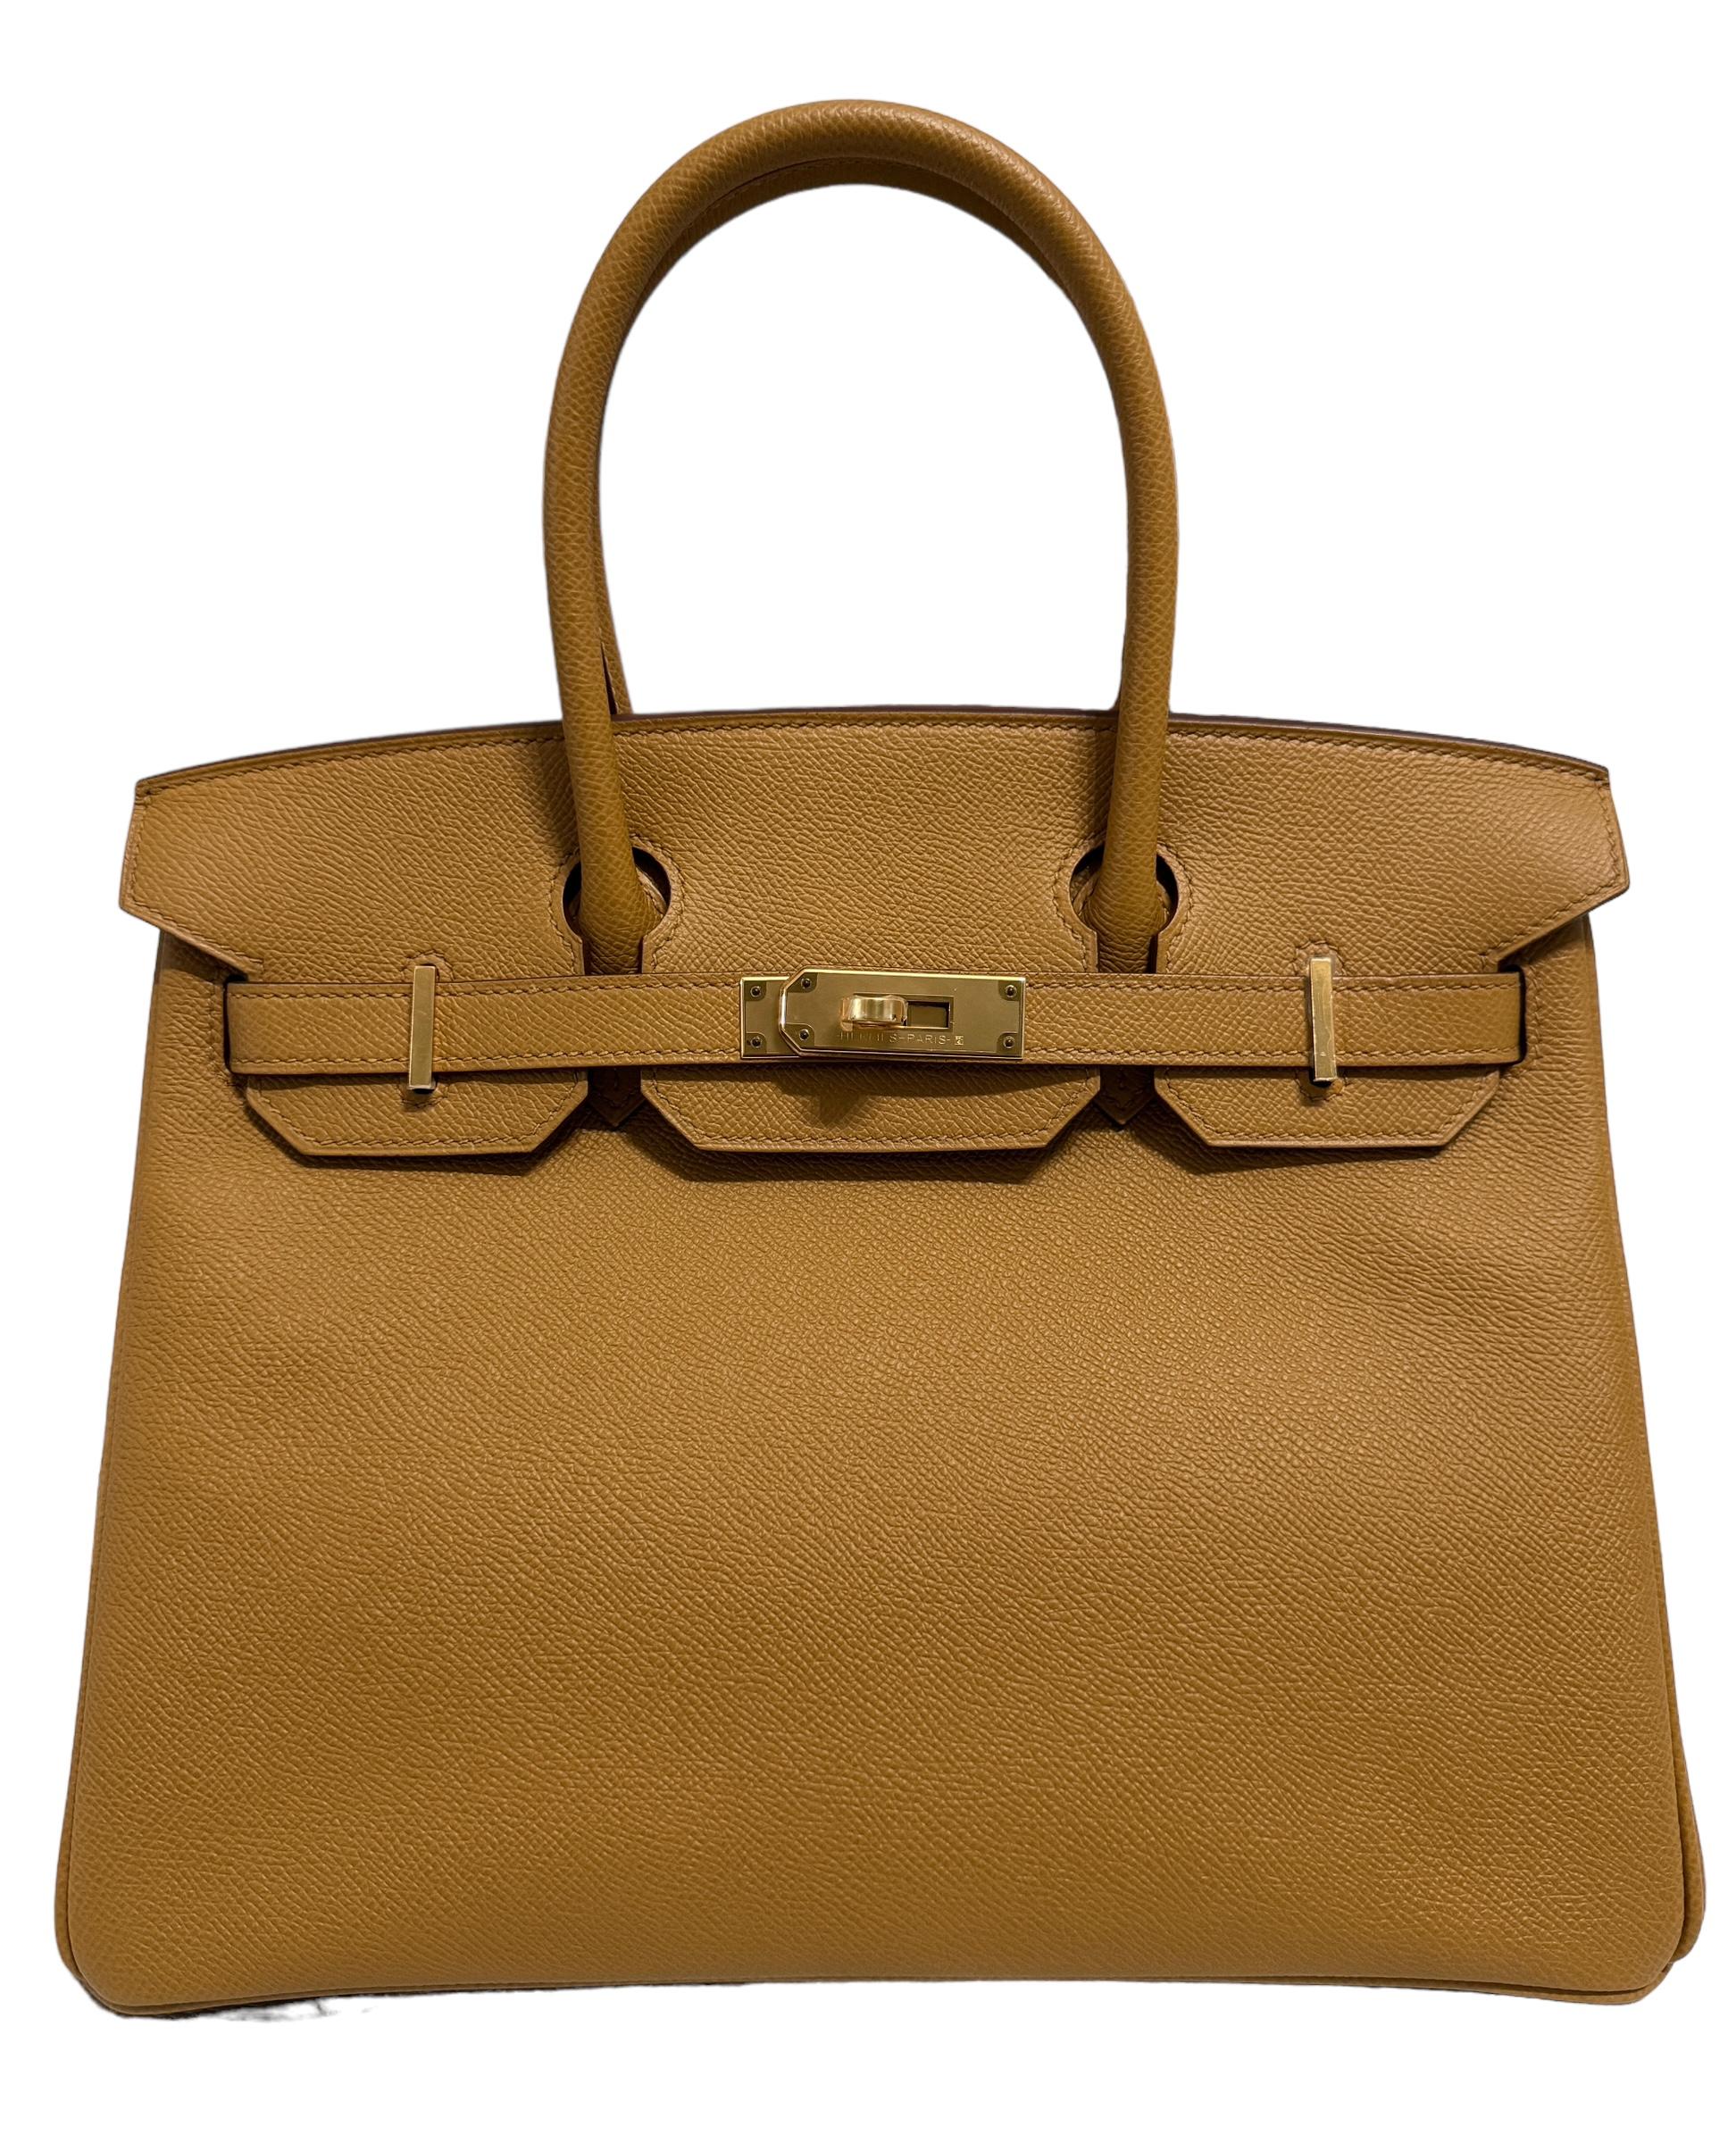 Absolutely Stunning Most Coveted As New Hermes Birkin 30 Sesame Epsom Leather complimented by Gold Hardware. As New 2020 Y Stamp. Includes all accessories and box.

Shop with Confidence from Lux Addicts. Authenticity Guaranteed! 

Lux Addicts is a